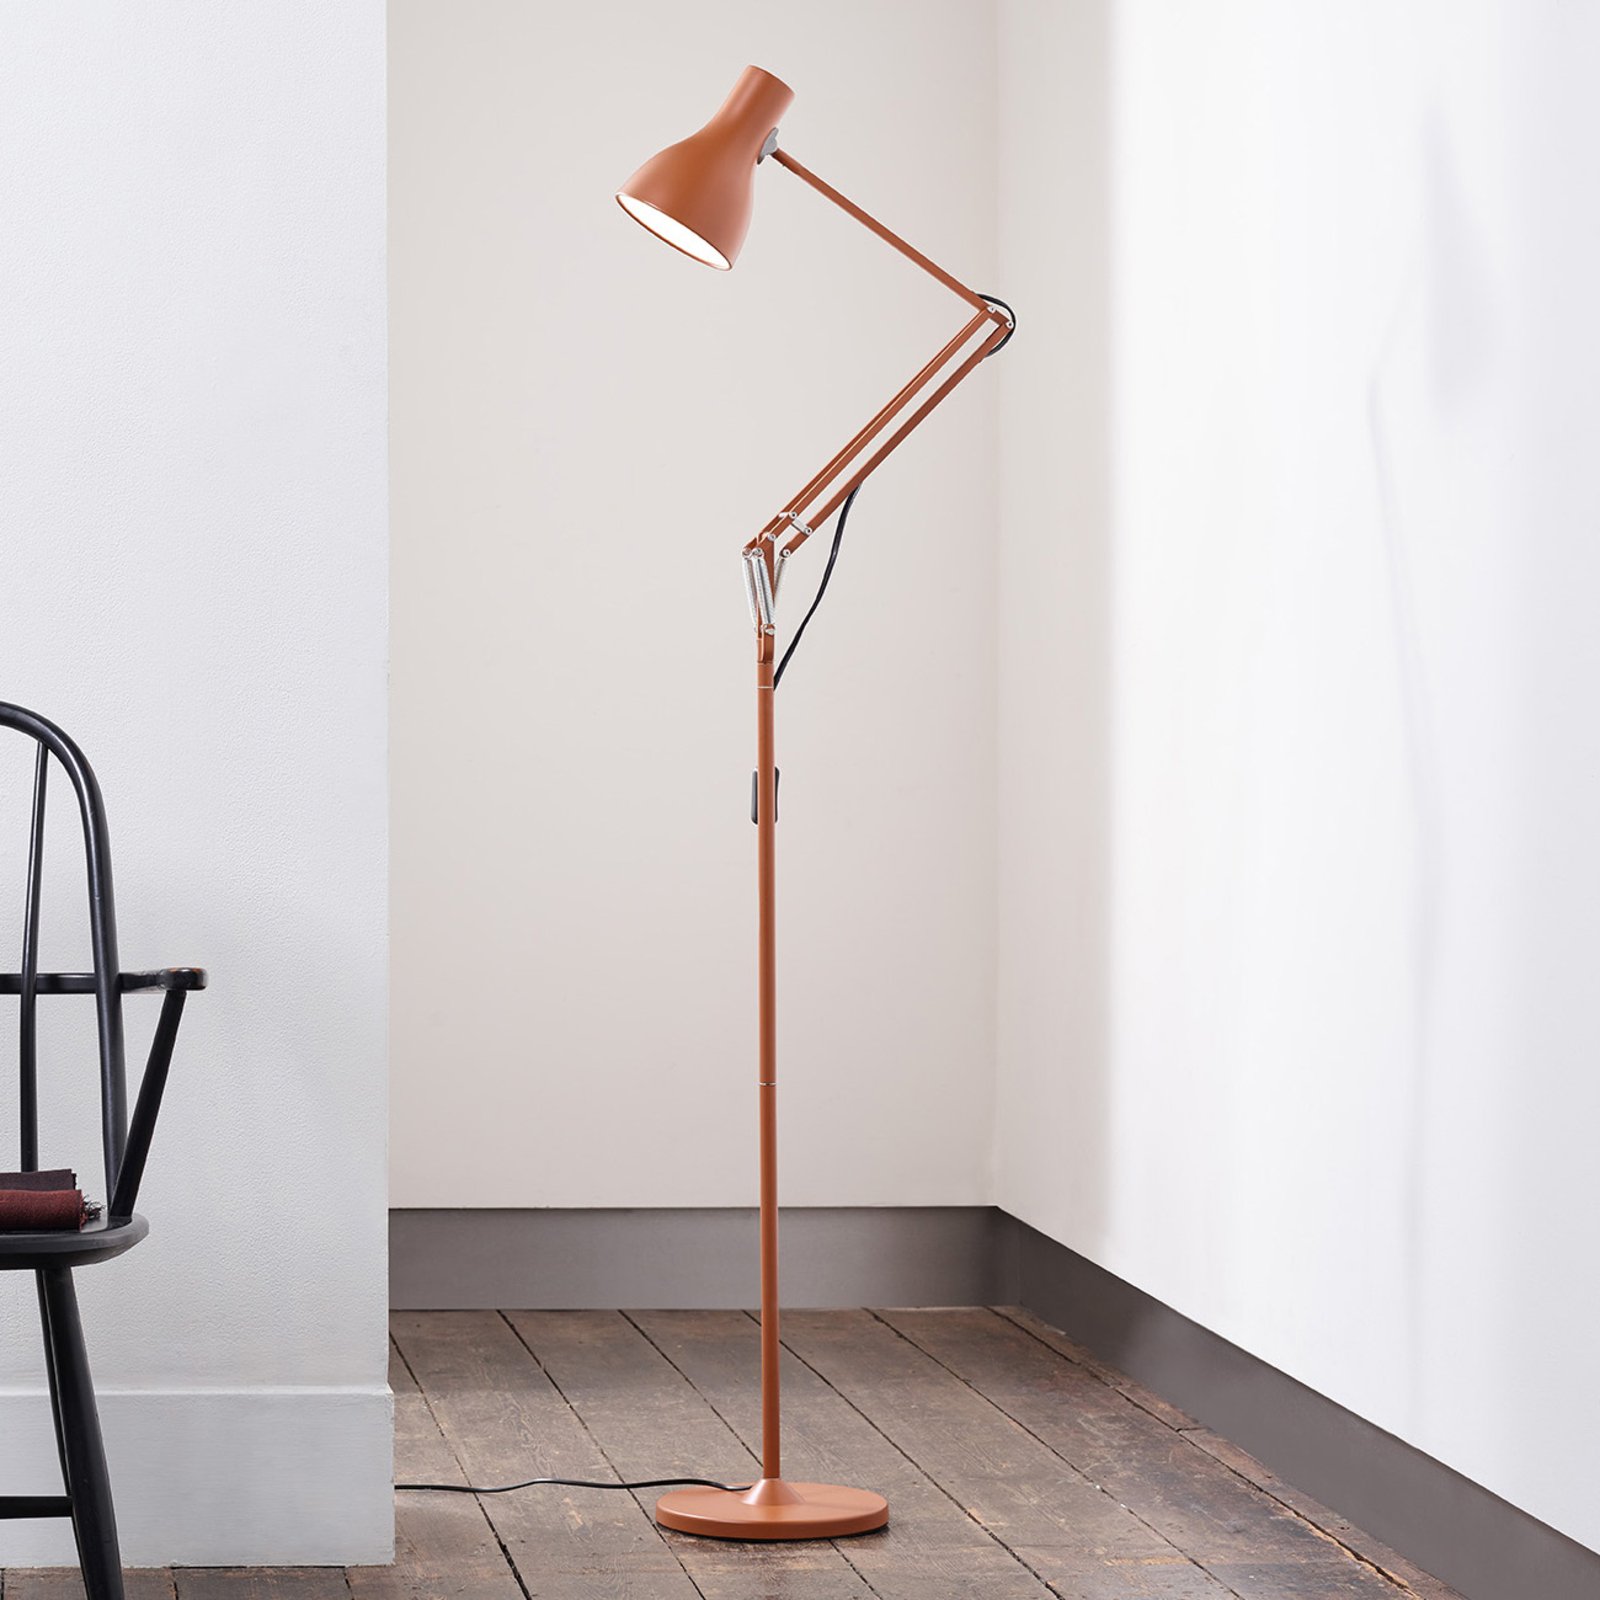 Anglepoise Type 75 lampad. Margaret Howell rouille